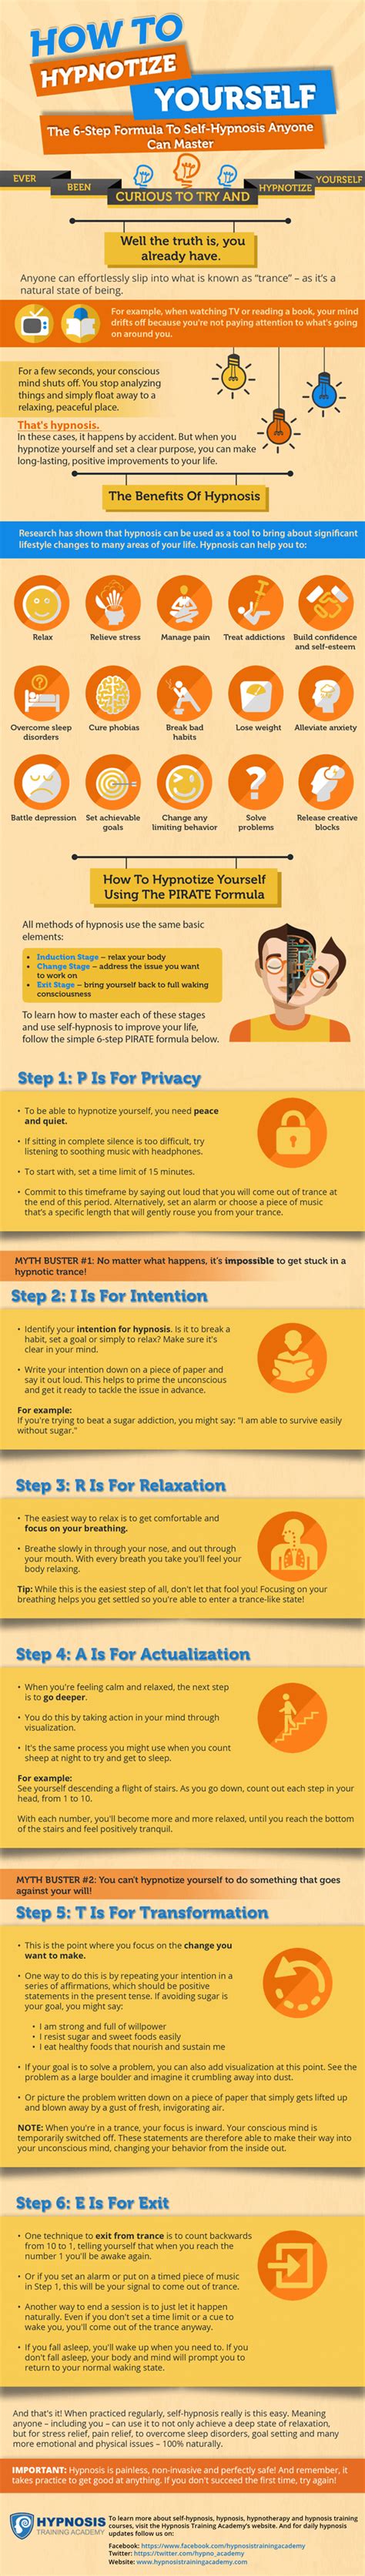 How To Hypnotize Yourself The 6 Step Self Hypnosis Formula Infographic